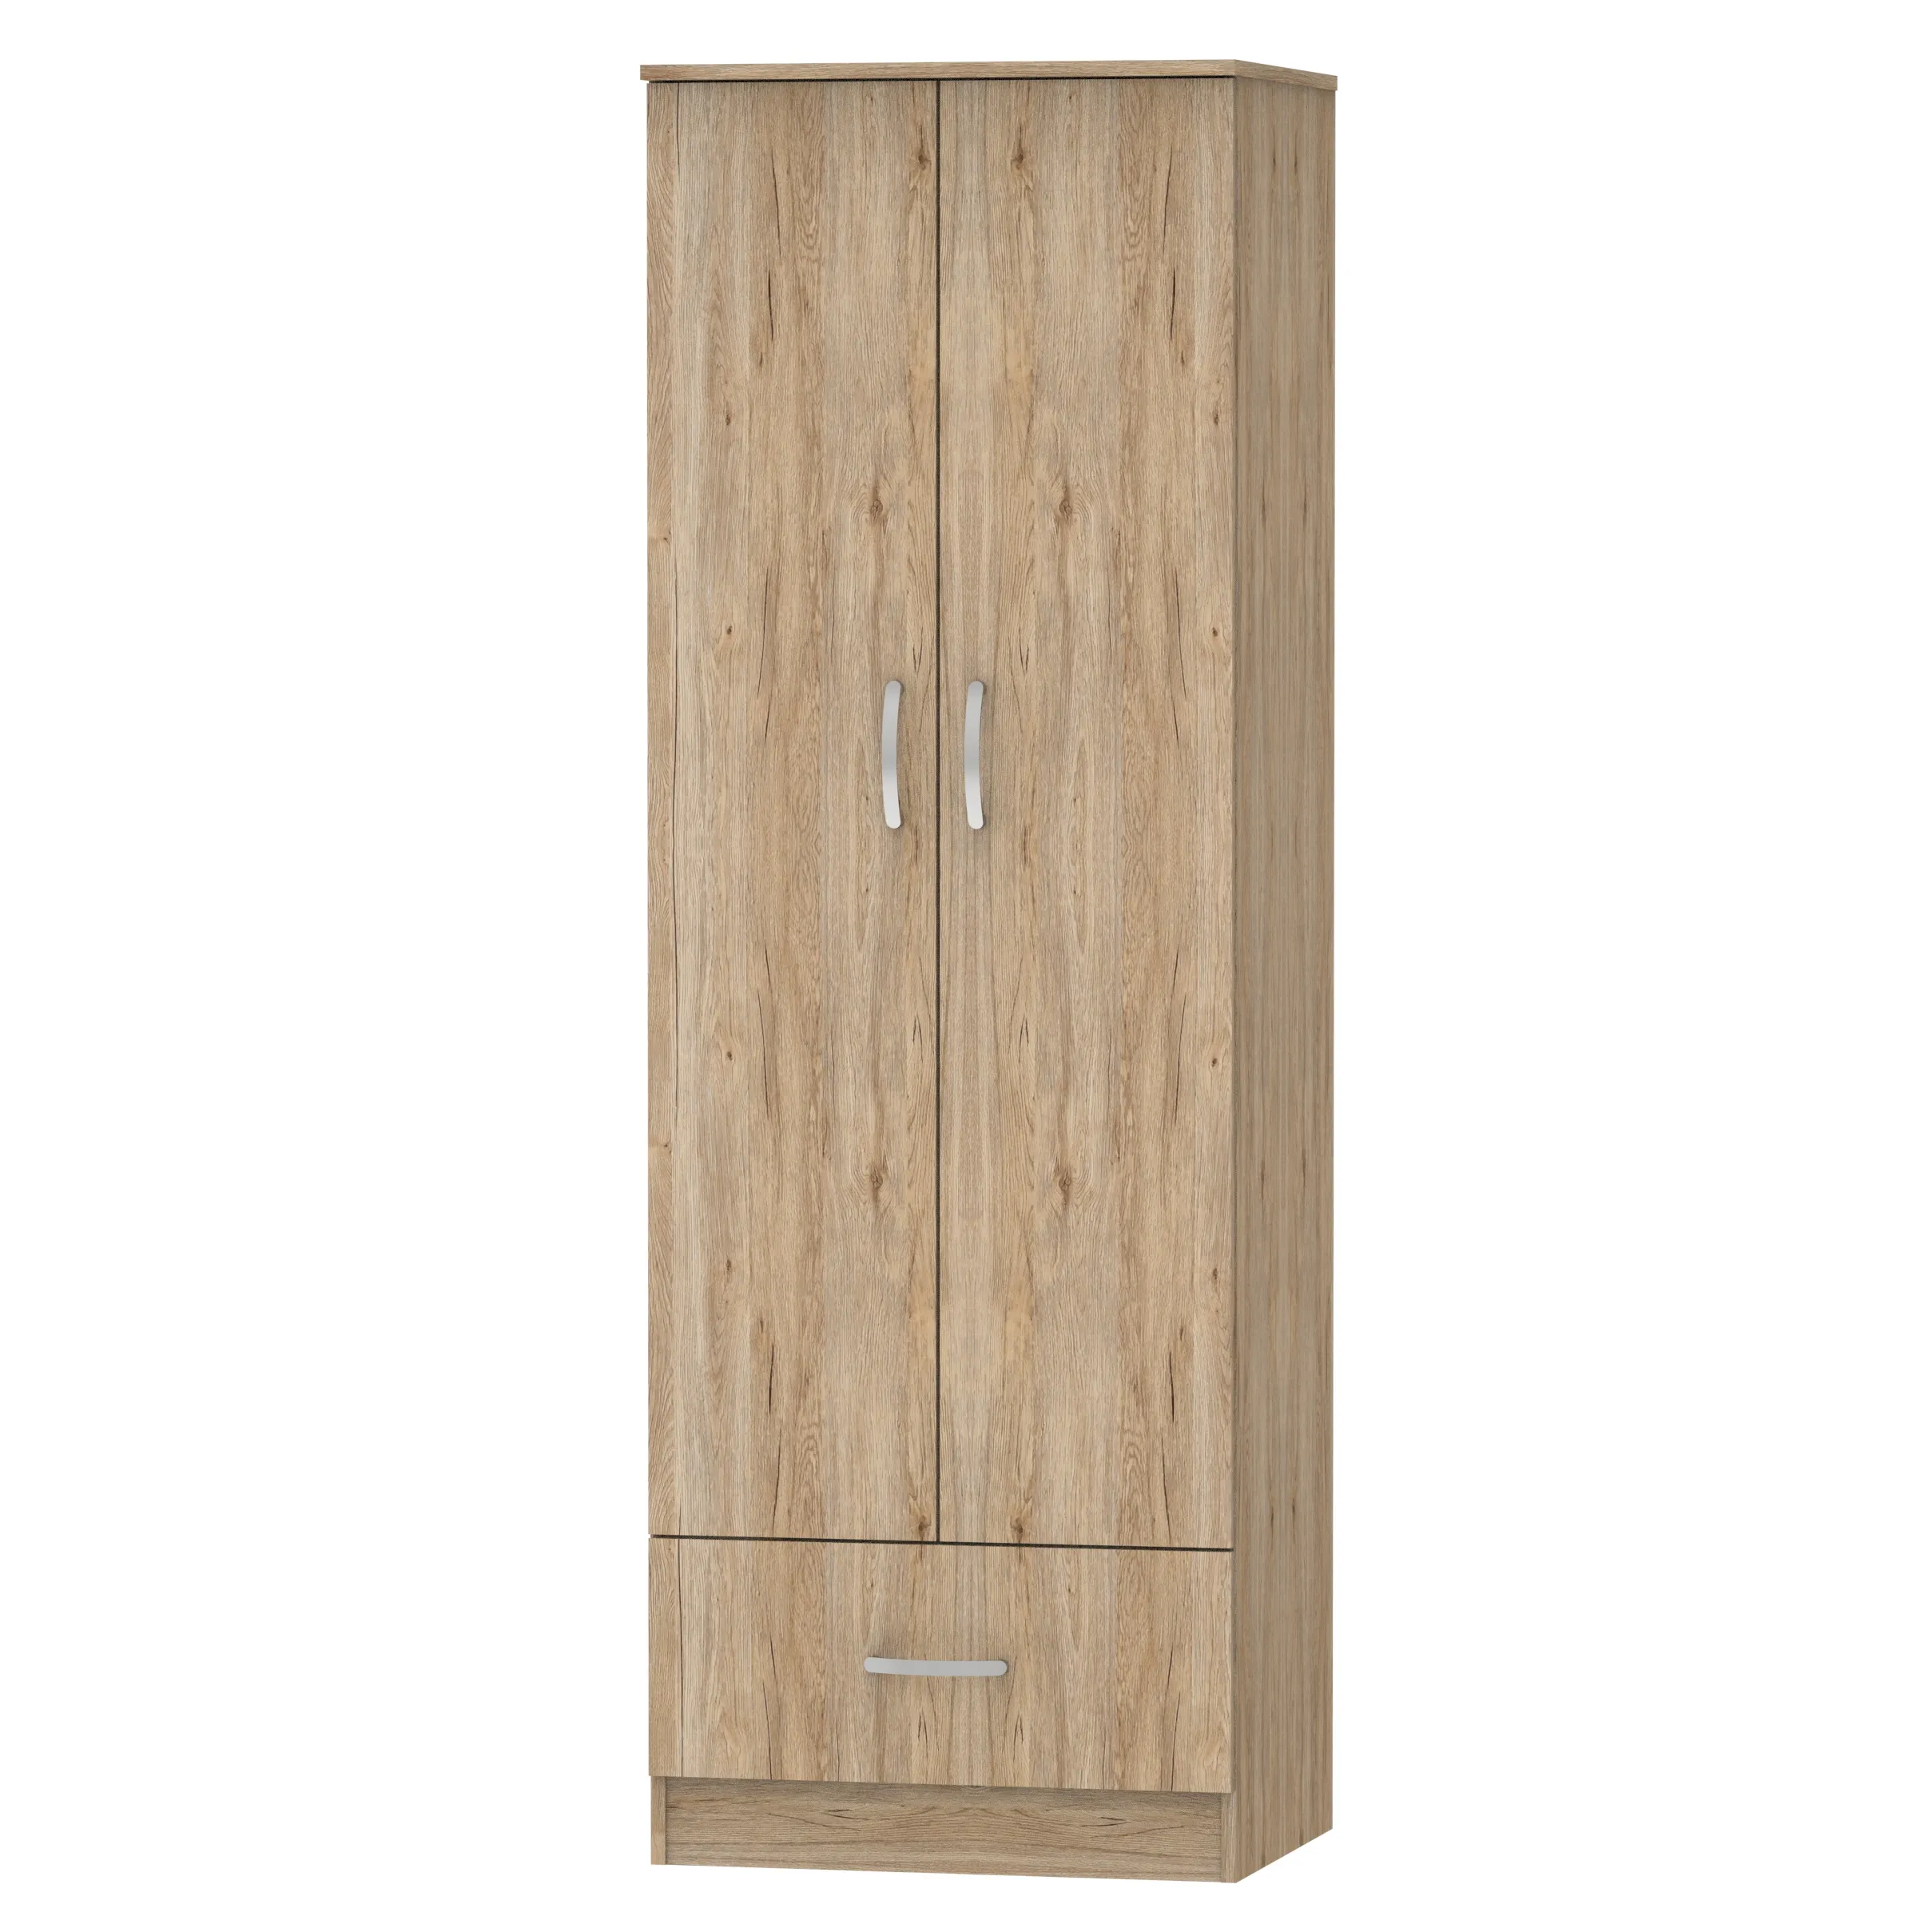 Factory Cheap Price Bedroom Wardrobe High Quality 2 Doors With Drawer Malaysia Supplier Furniture 1217